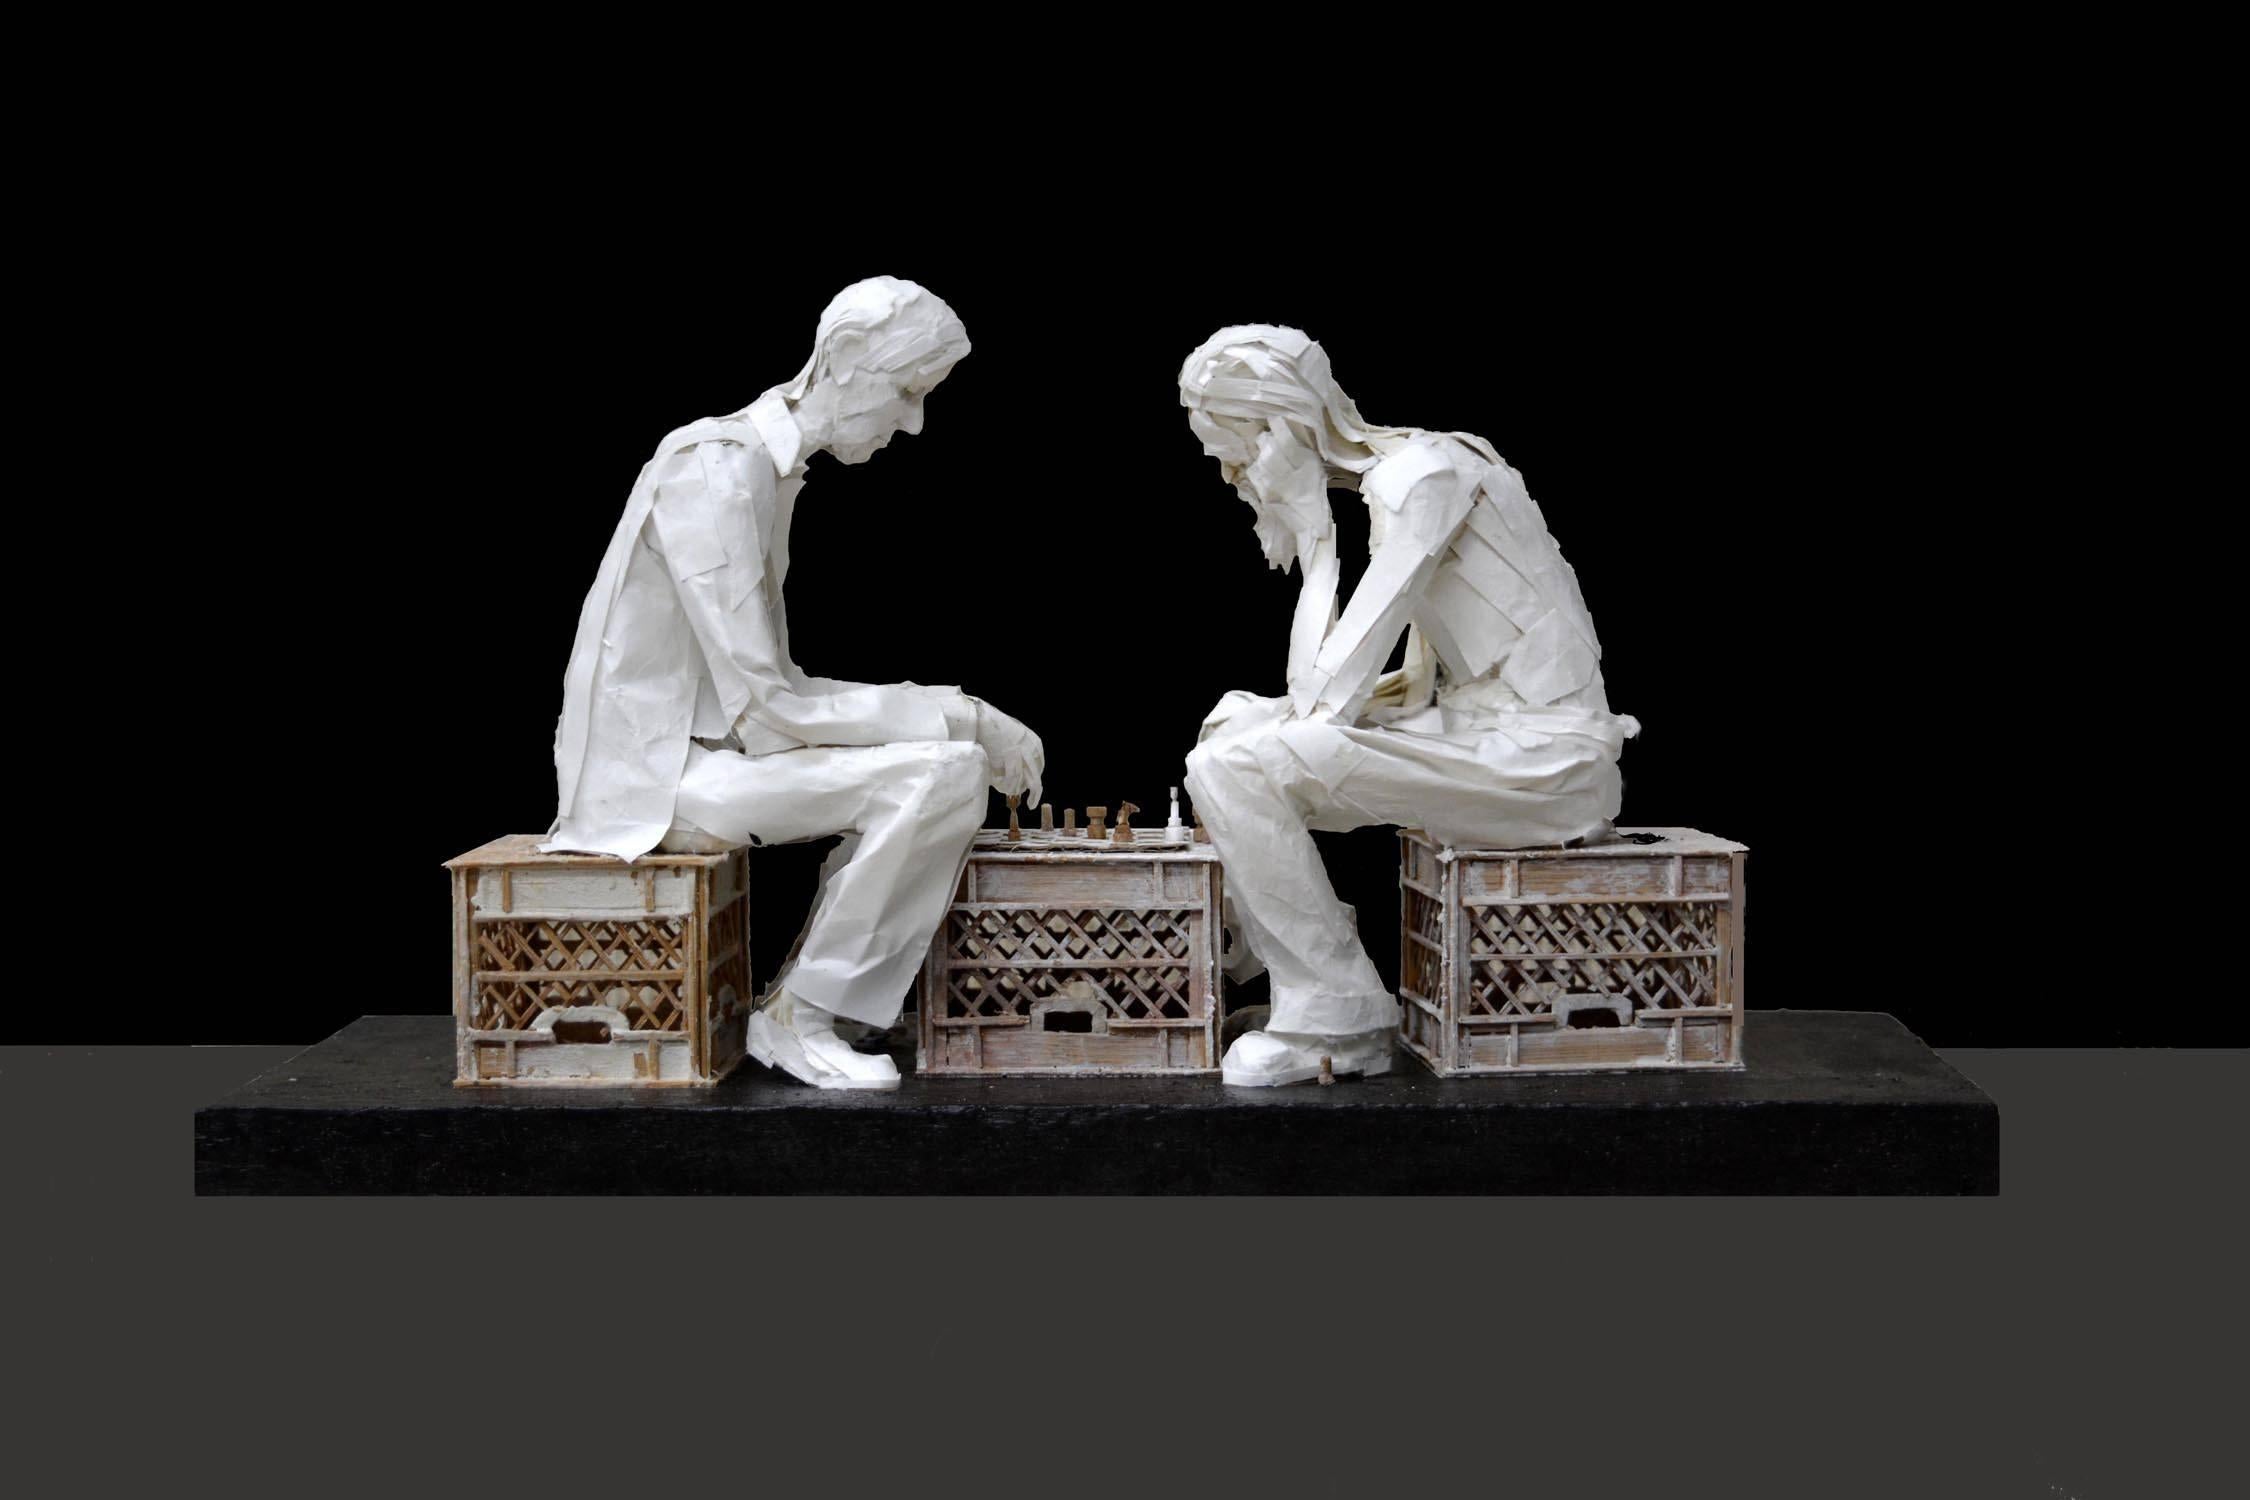 Ivan Markovic Figurative Sculpture - The Chess Players